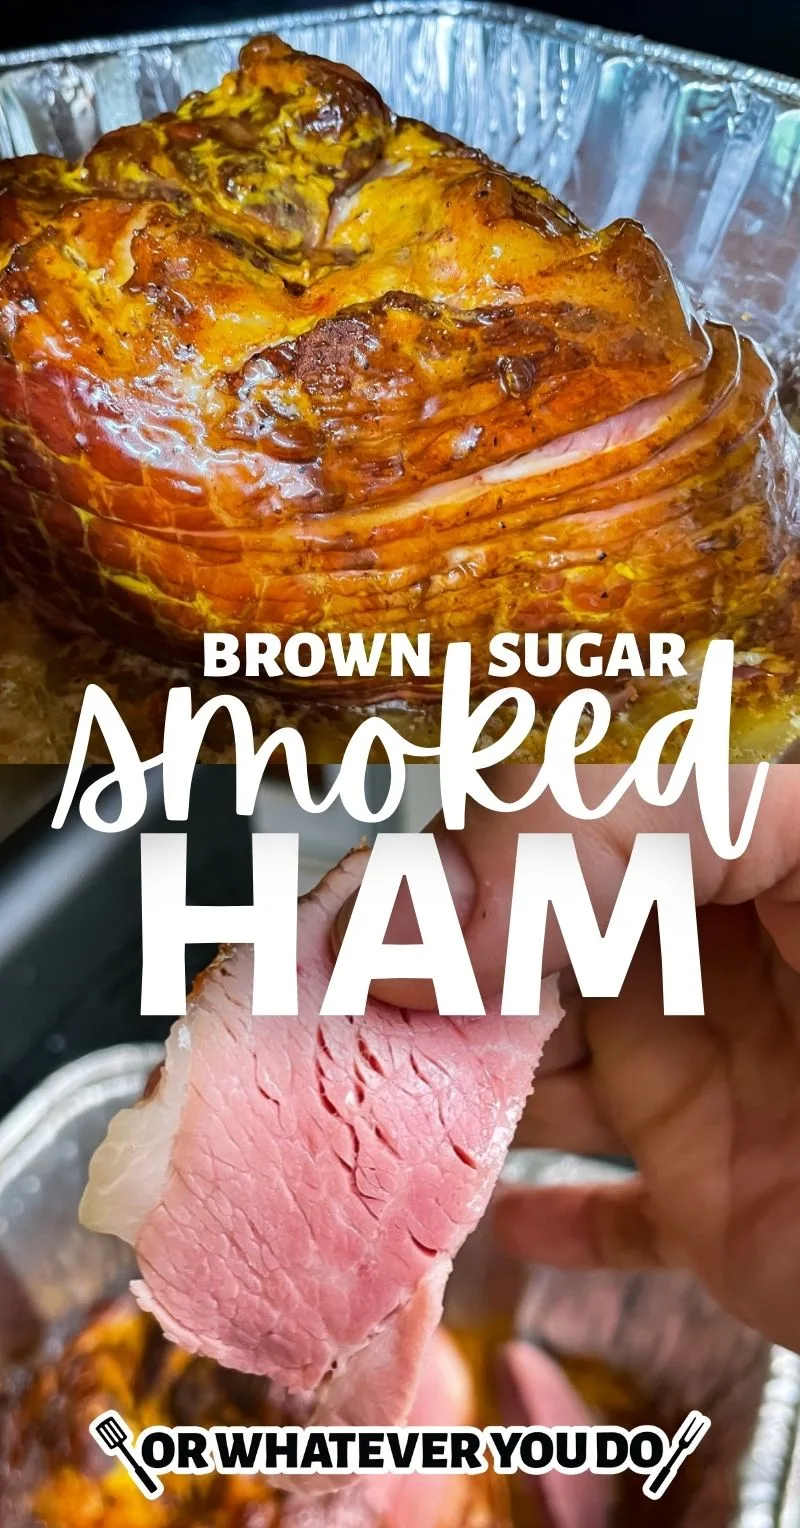 Double Smoked Ham with Brown Sugar Glaze - Or Whatever You Do